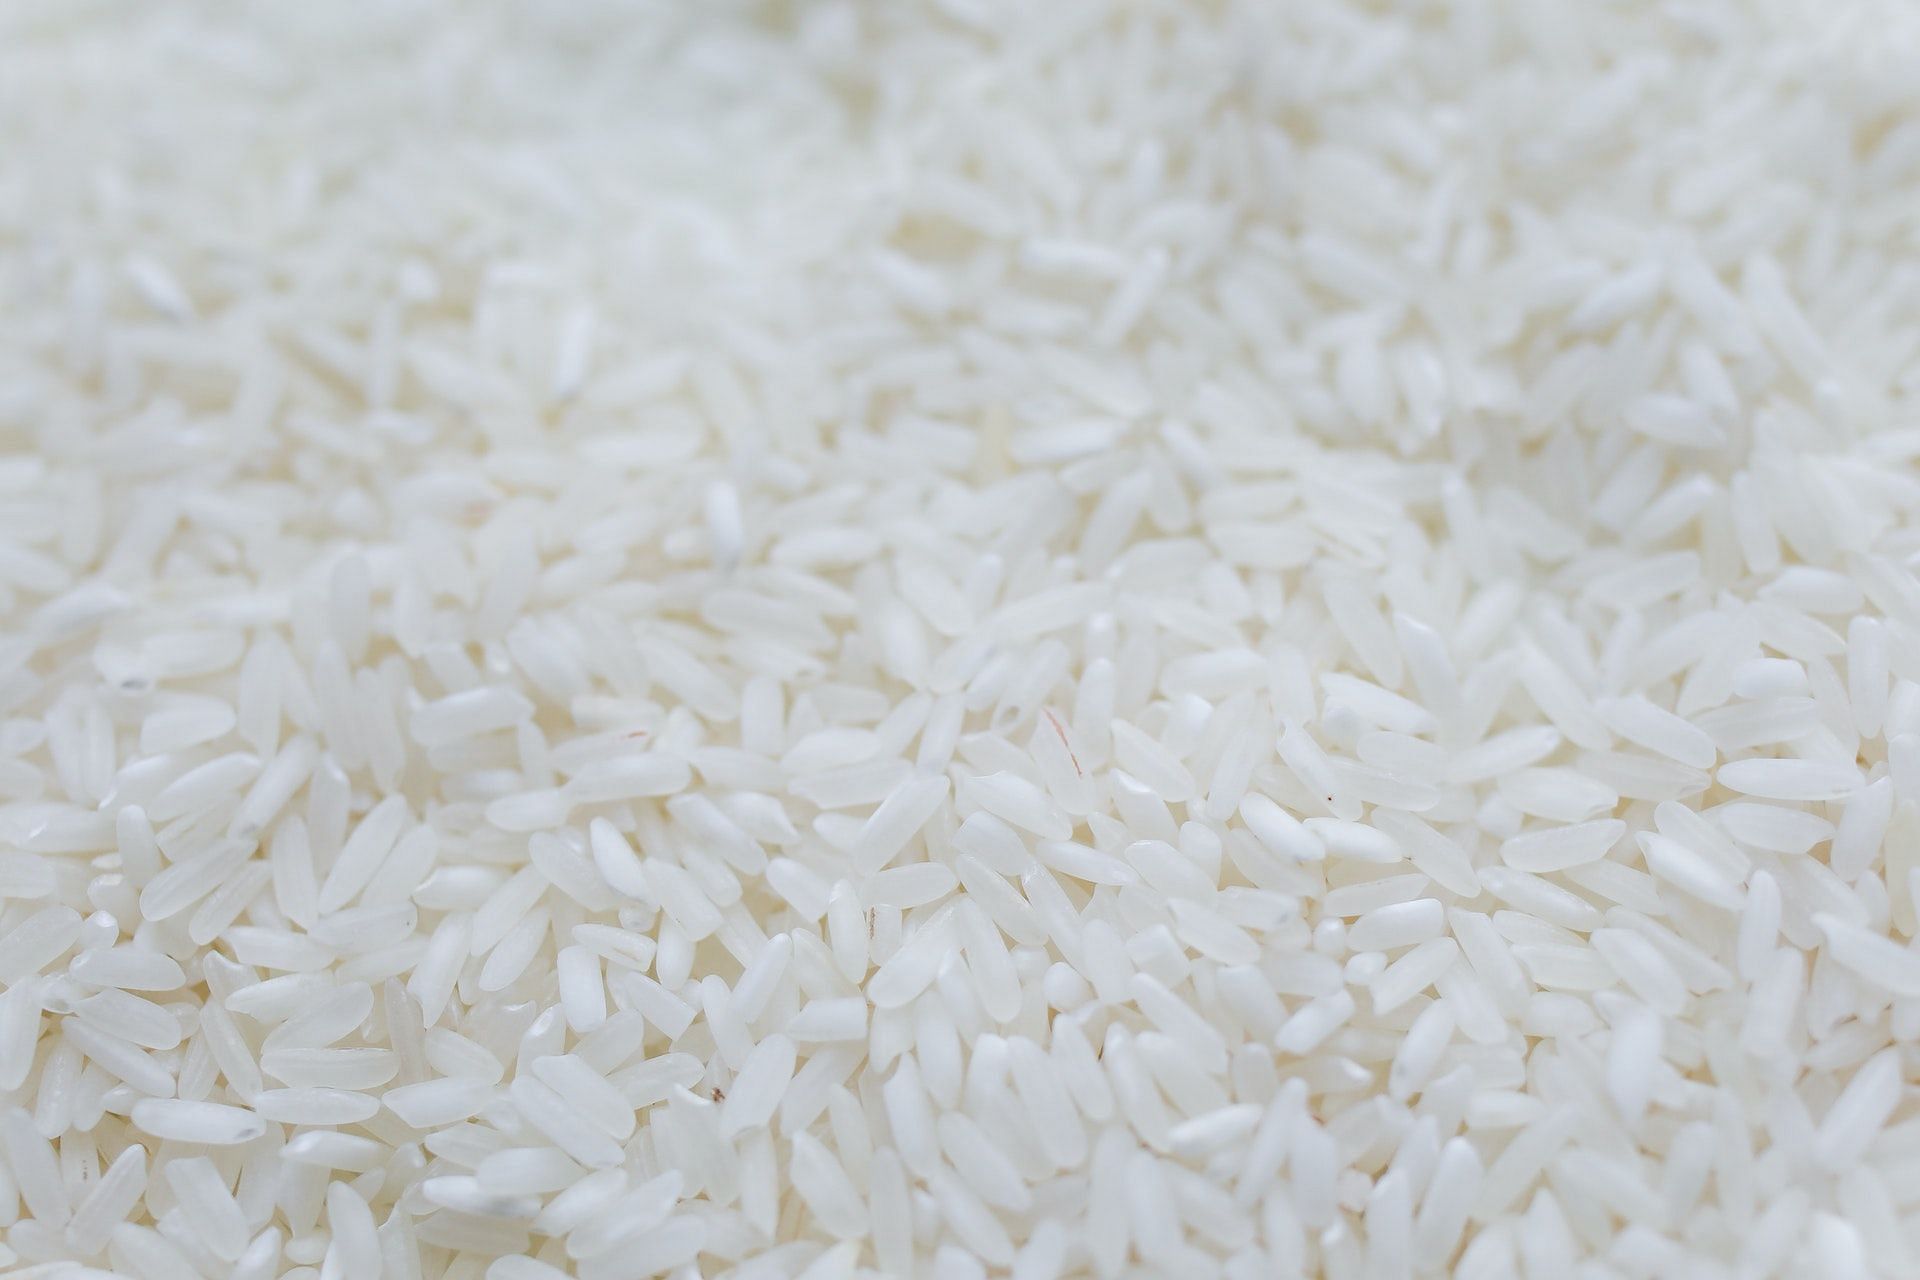 Rice water can be easily made at home. (Photo via Pexels/Polina Tankilevitch)